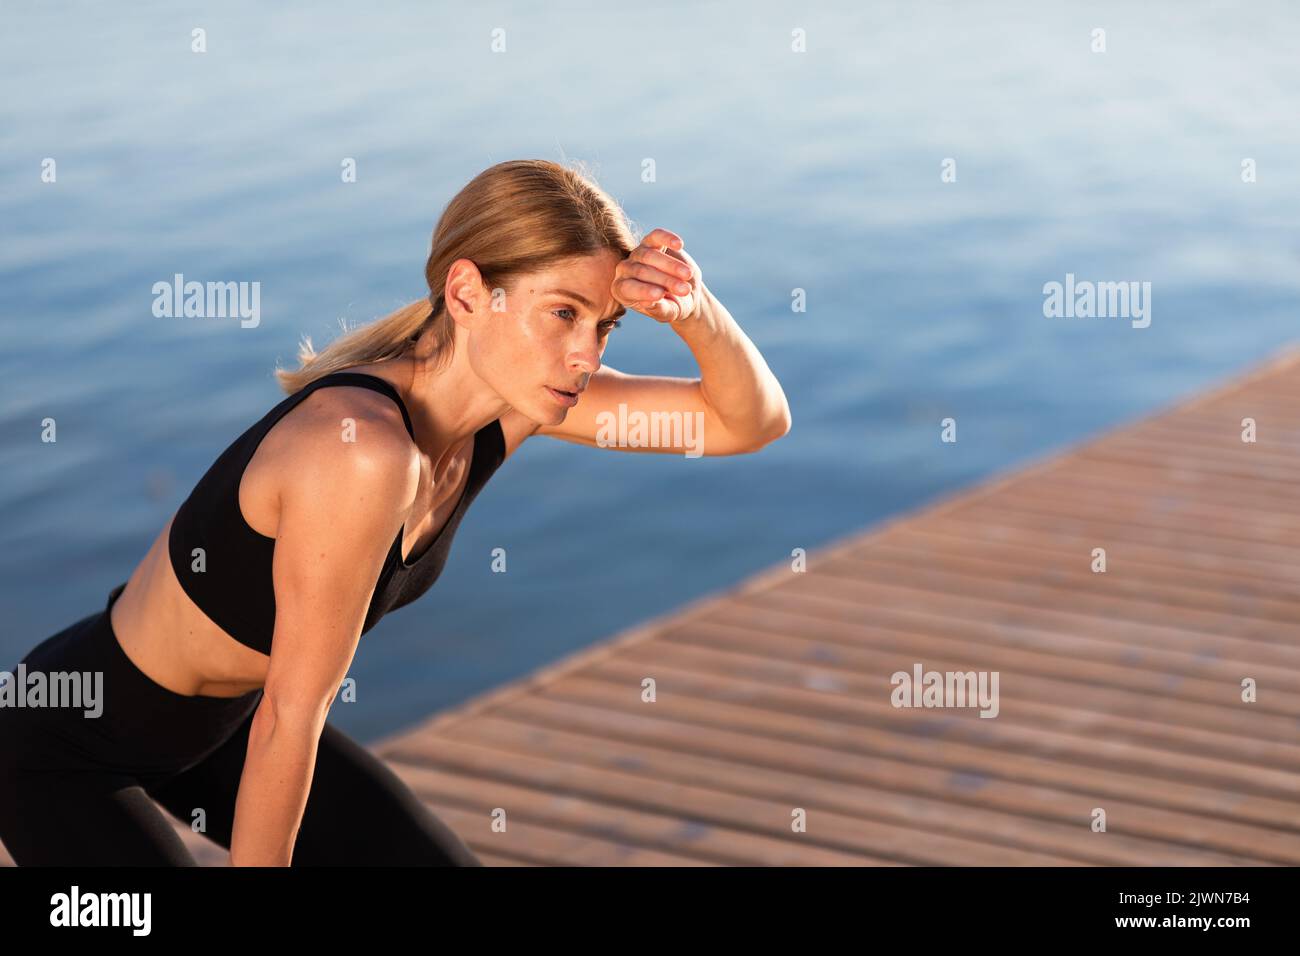 Portrait Of Exhausted Sporty Lady Catching Breath After Outdoor Training Stock Photo